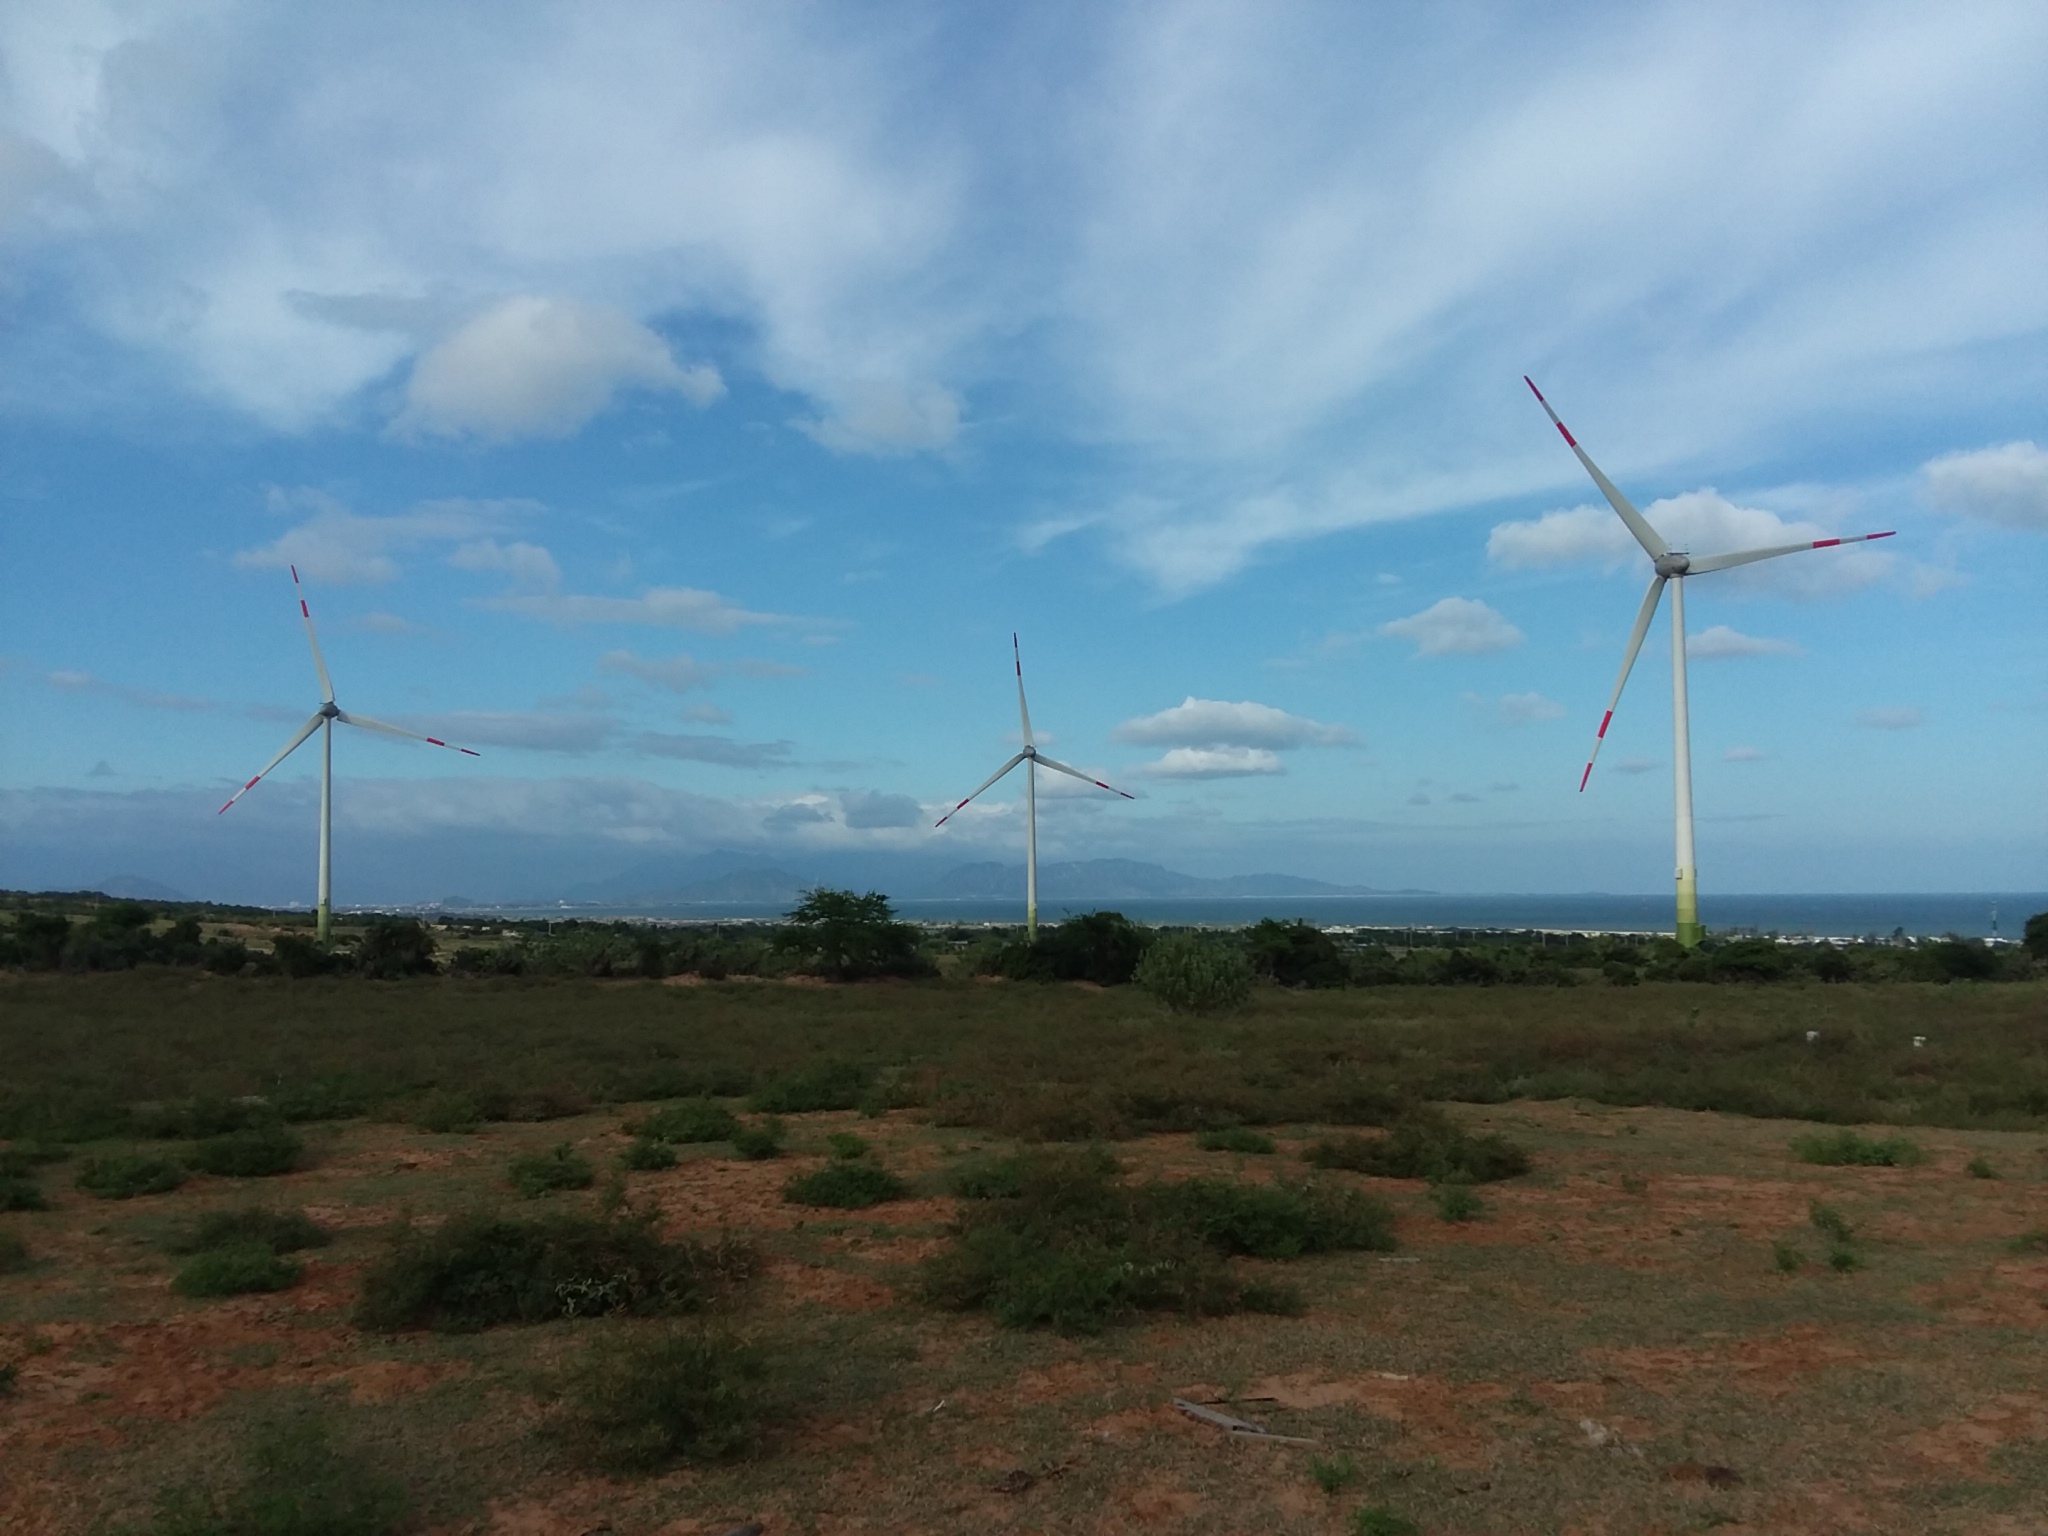 Ficus Capital acted as exclusive M&A advisor to ven-wind New Energy regarding the sale of Mui Dinh project, a 37.6 MW wind farm in Vietnam